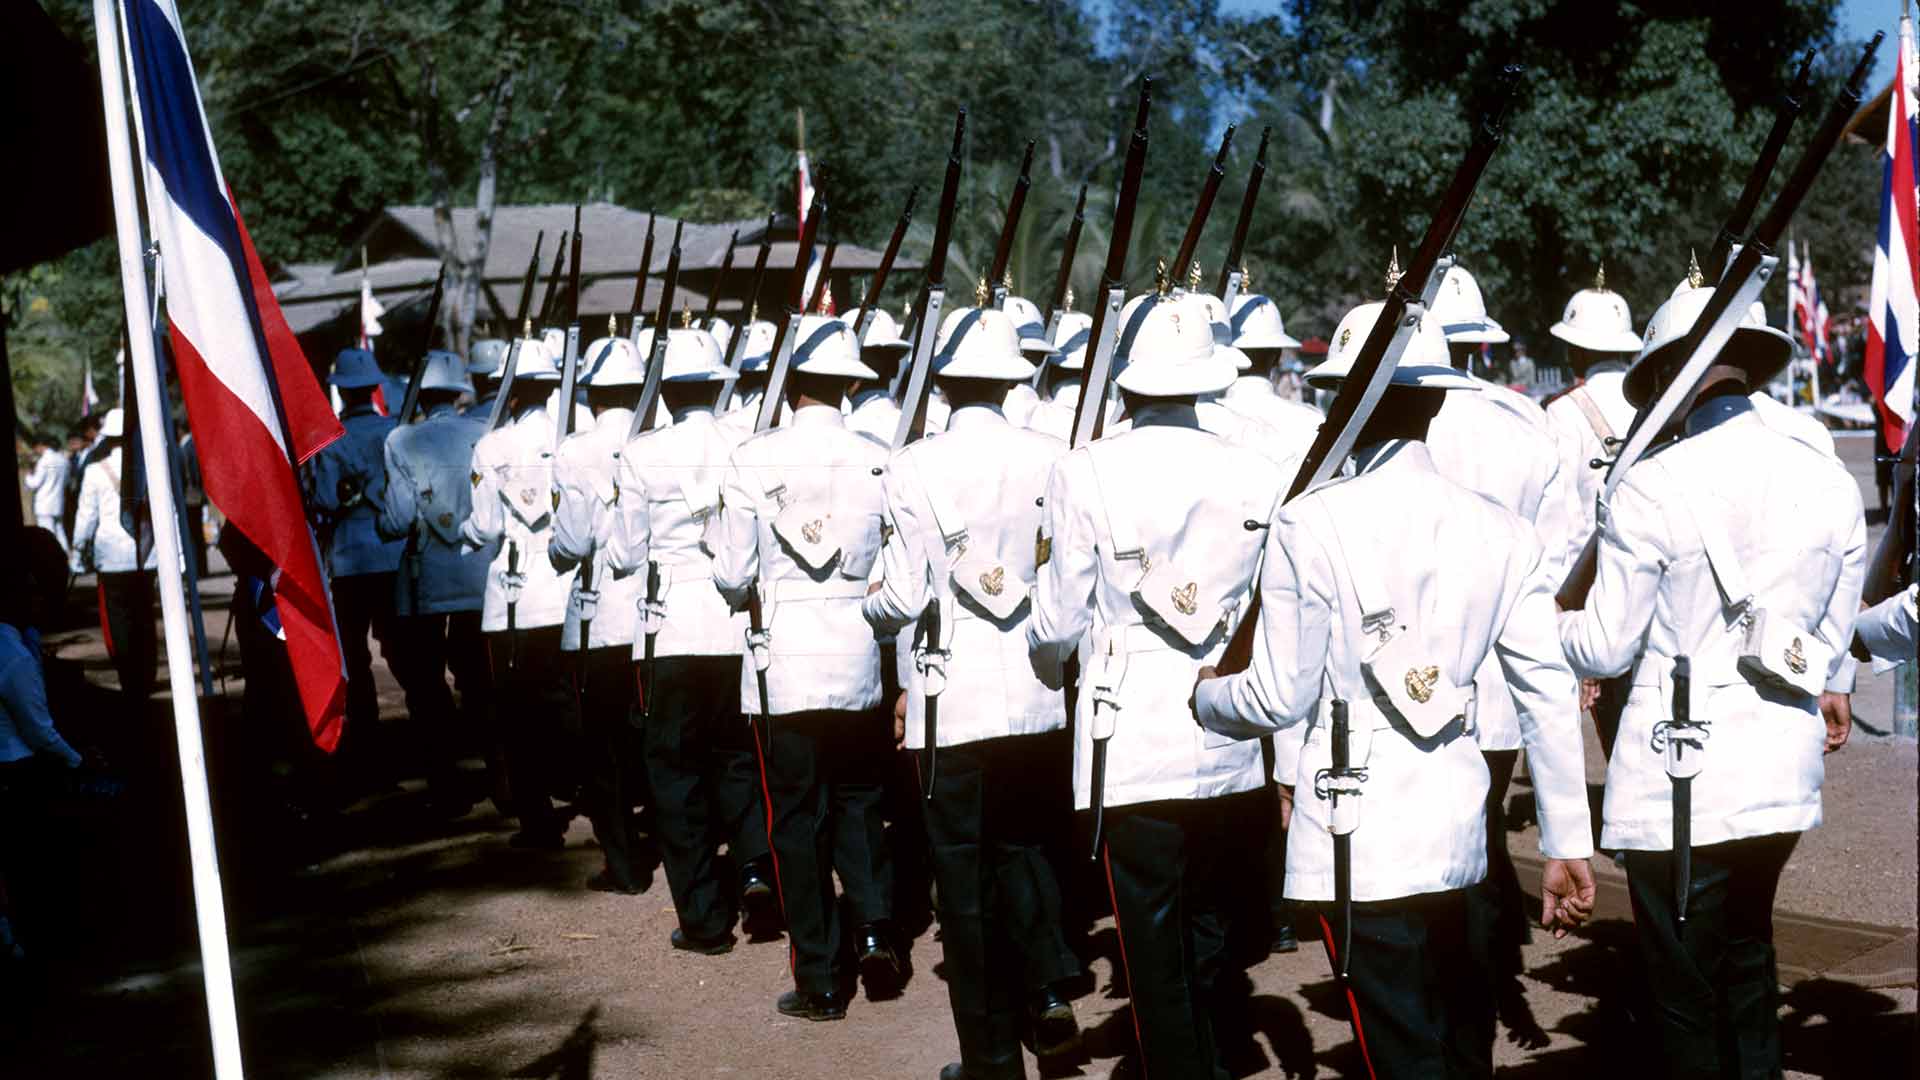 A procession of about 20  guards in white military dress and weaponry